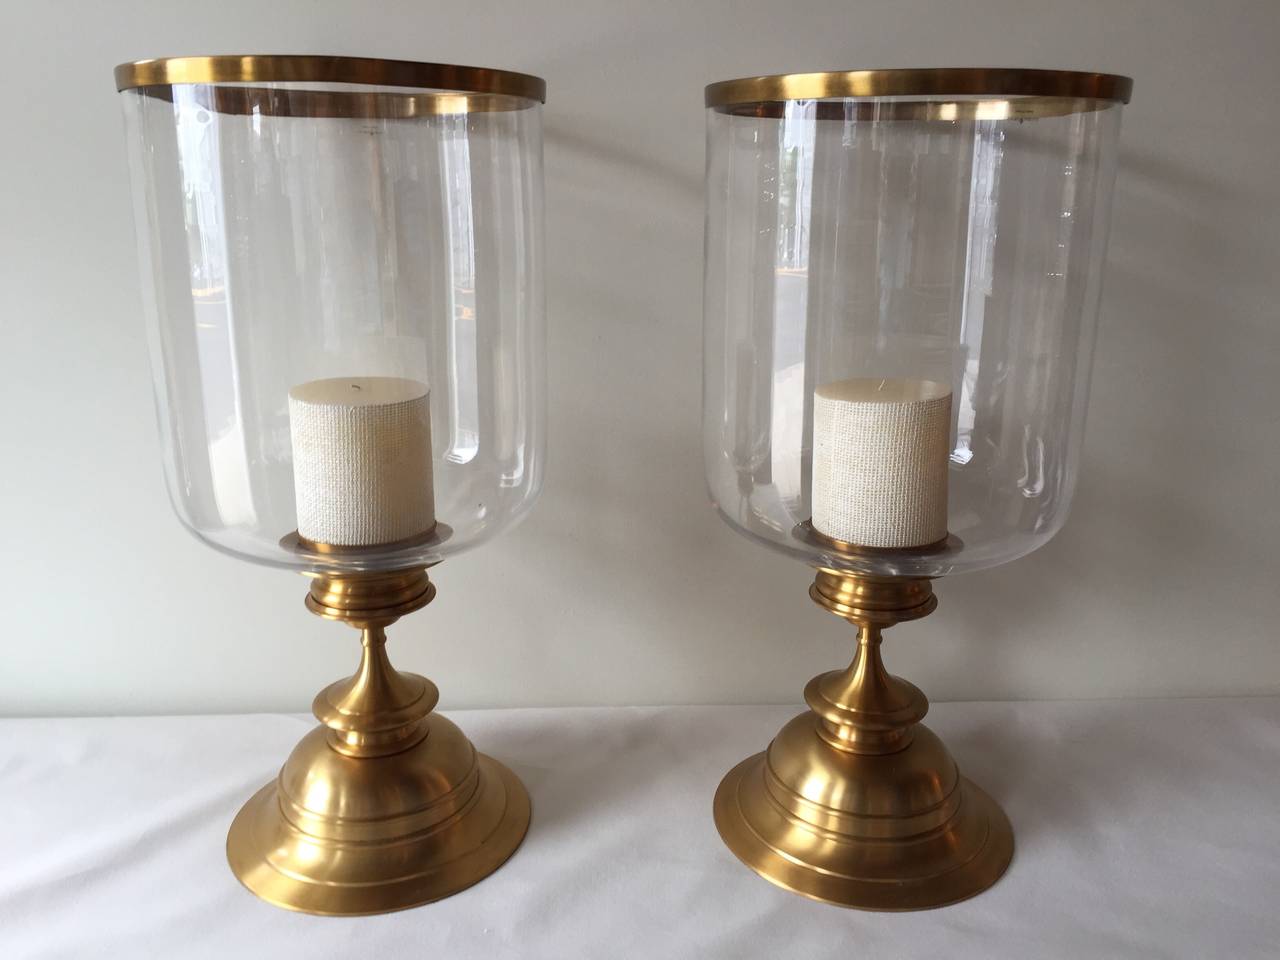 Pair of Brass Satin Finish Extra Large Hurricane Lamps at 1stDibs